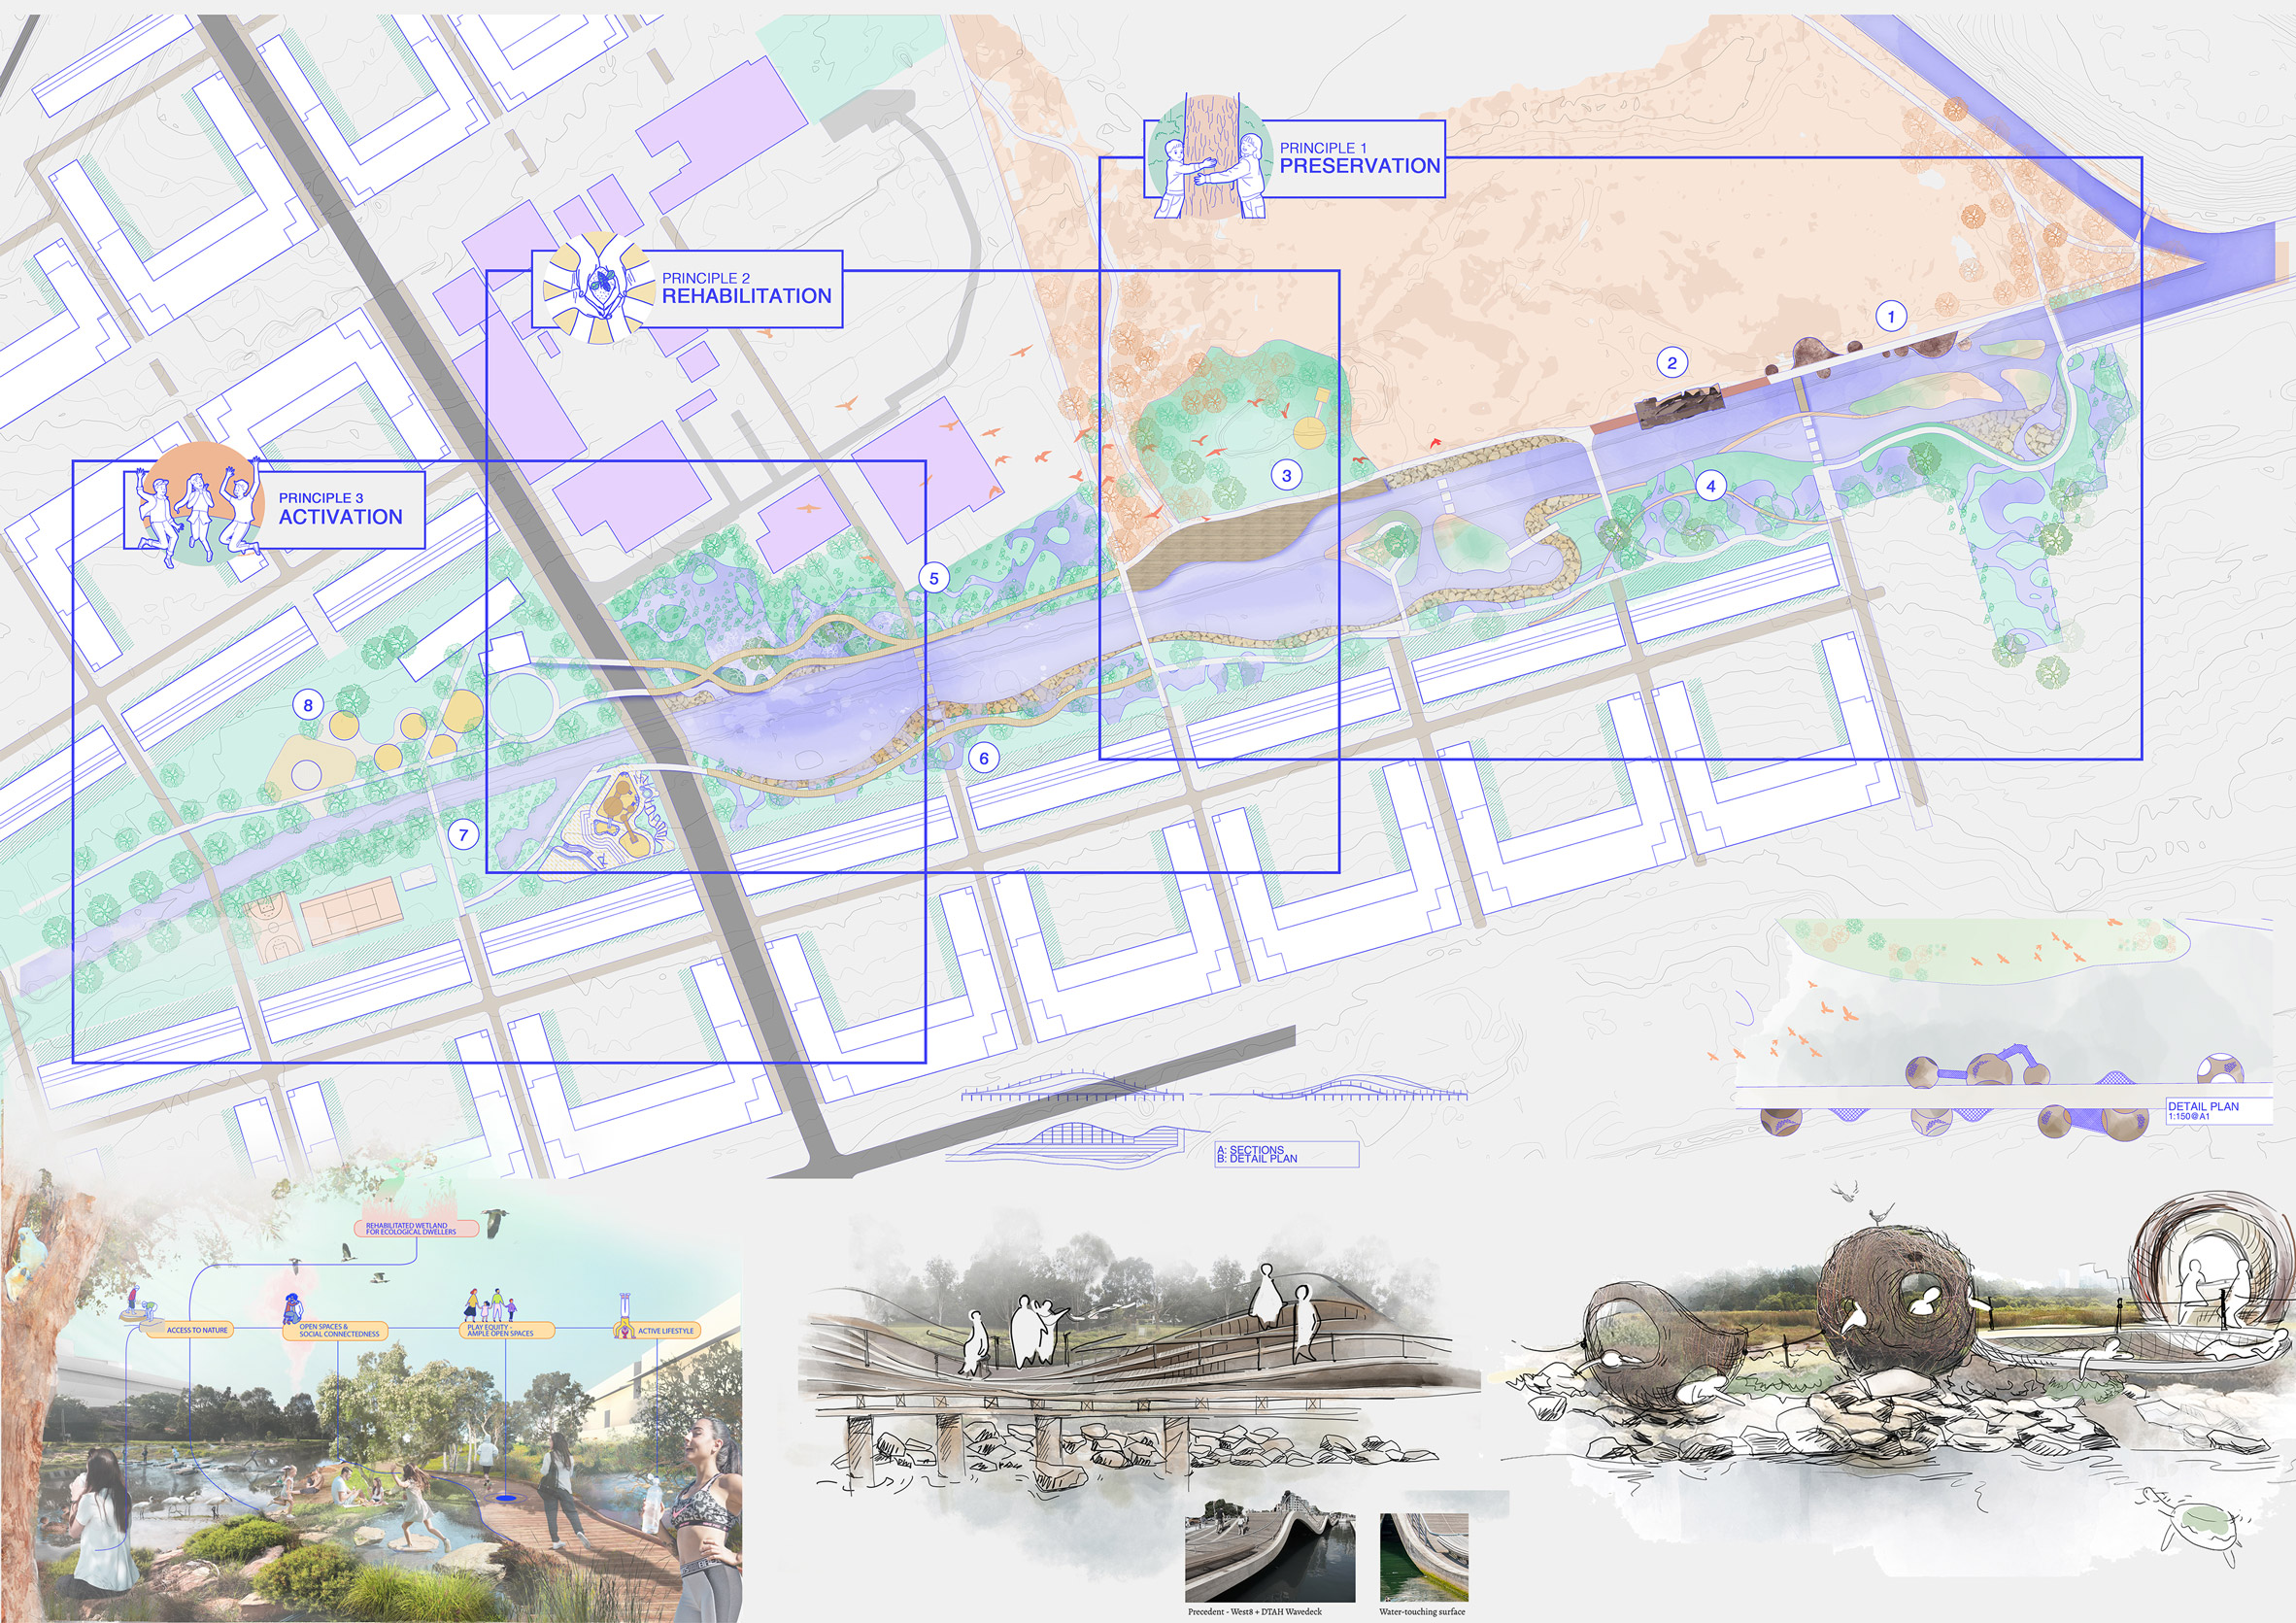 Landscape architecture drawings by UNSW Sydney student Shuyi Gong